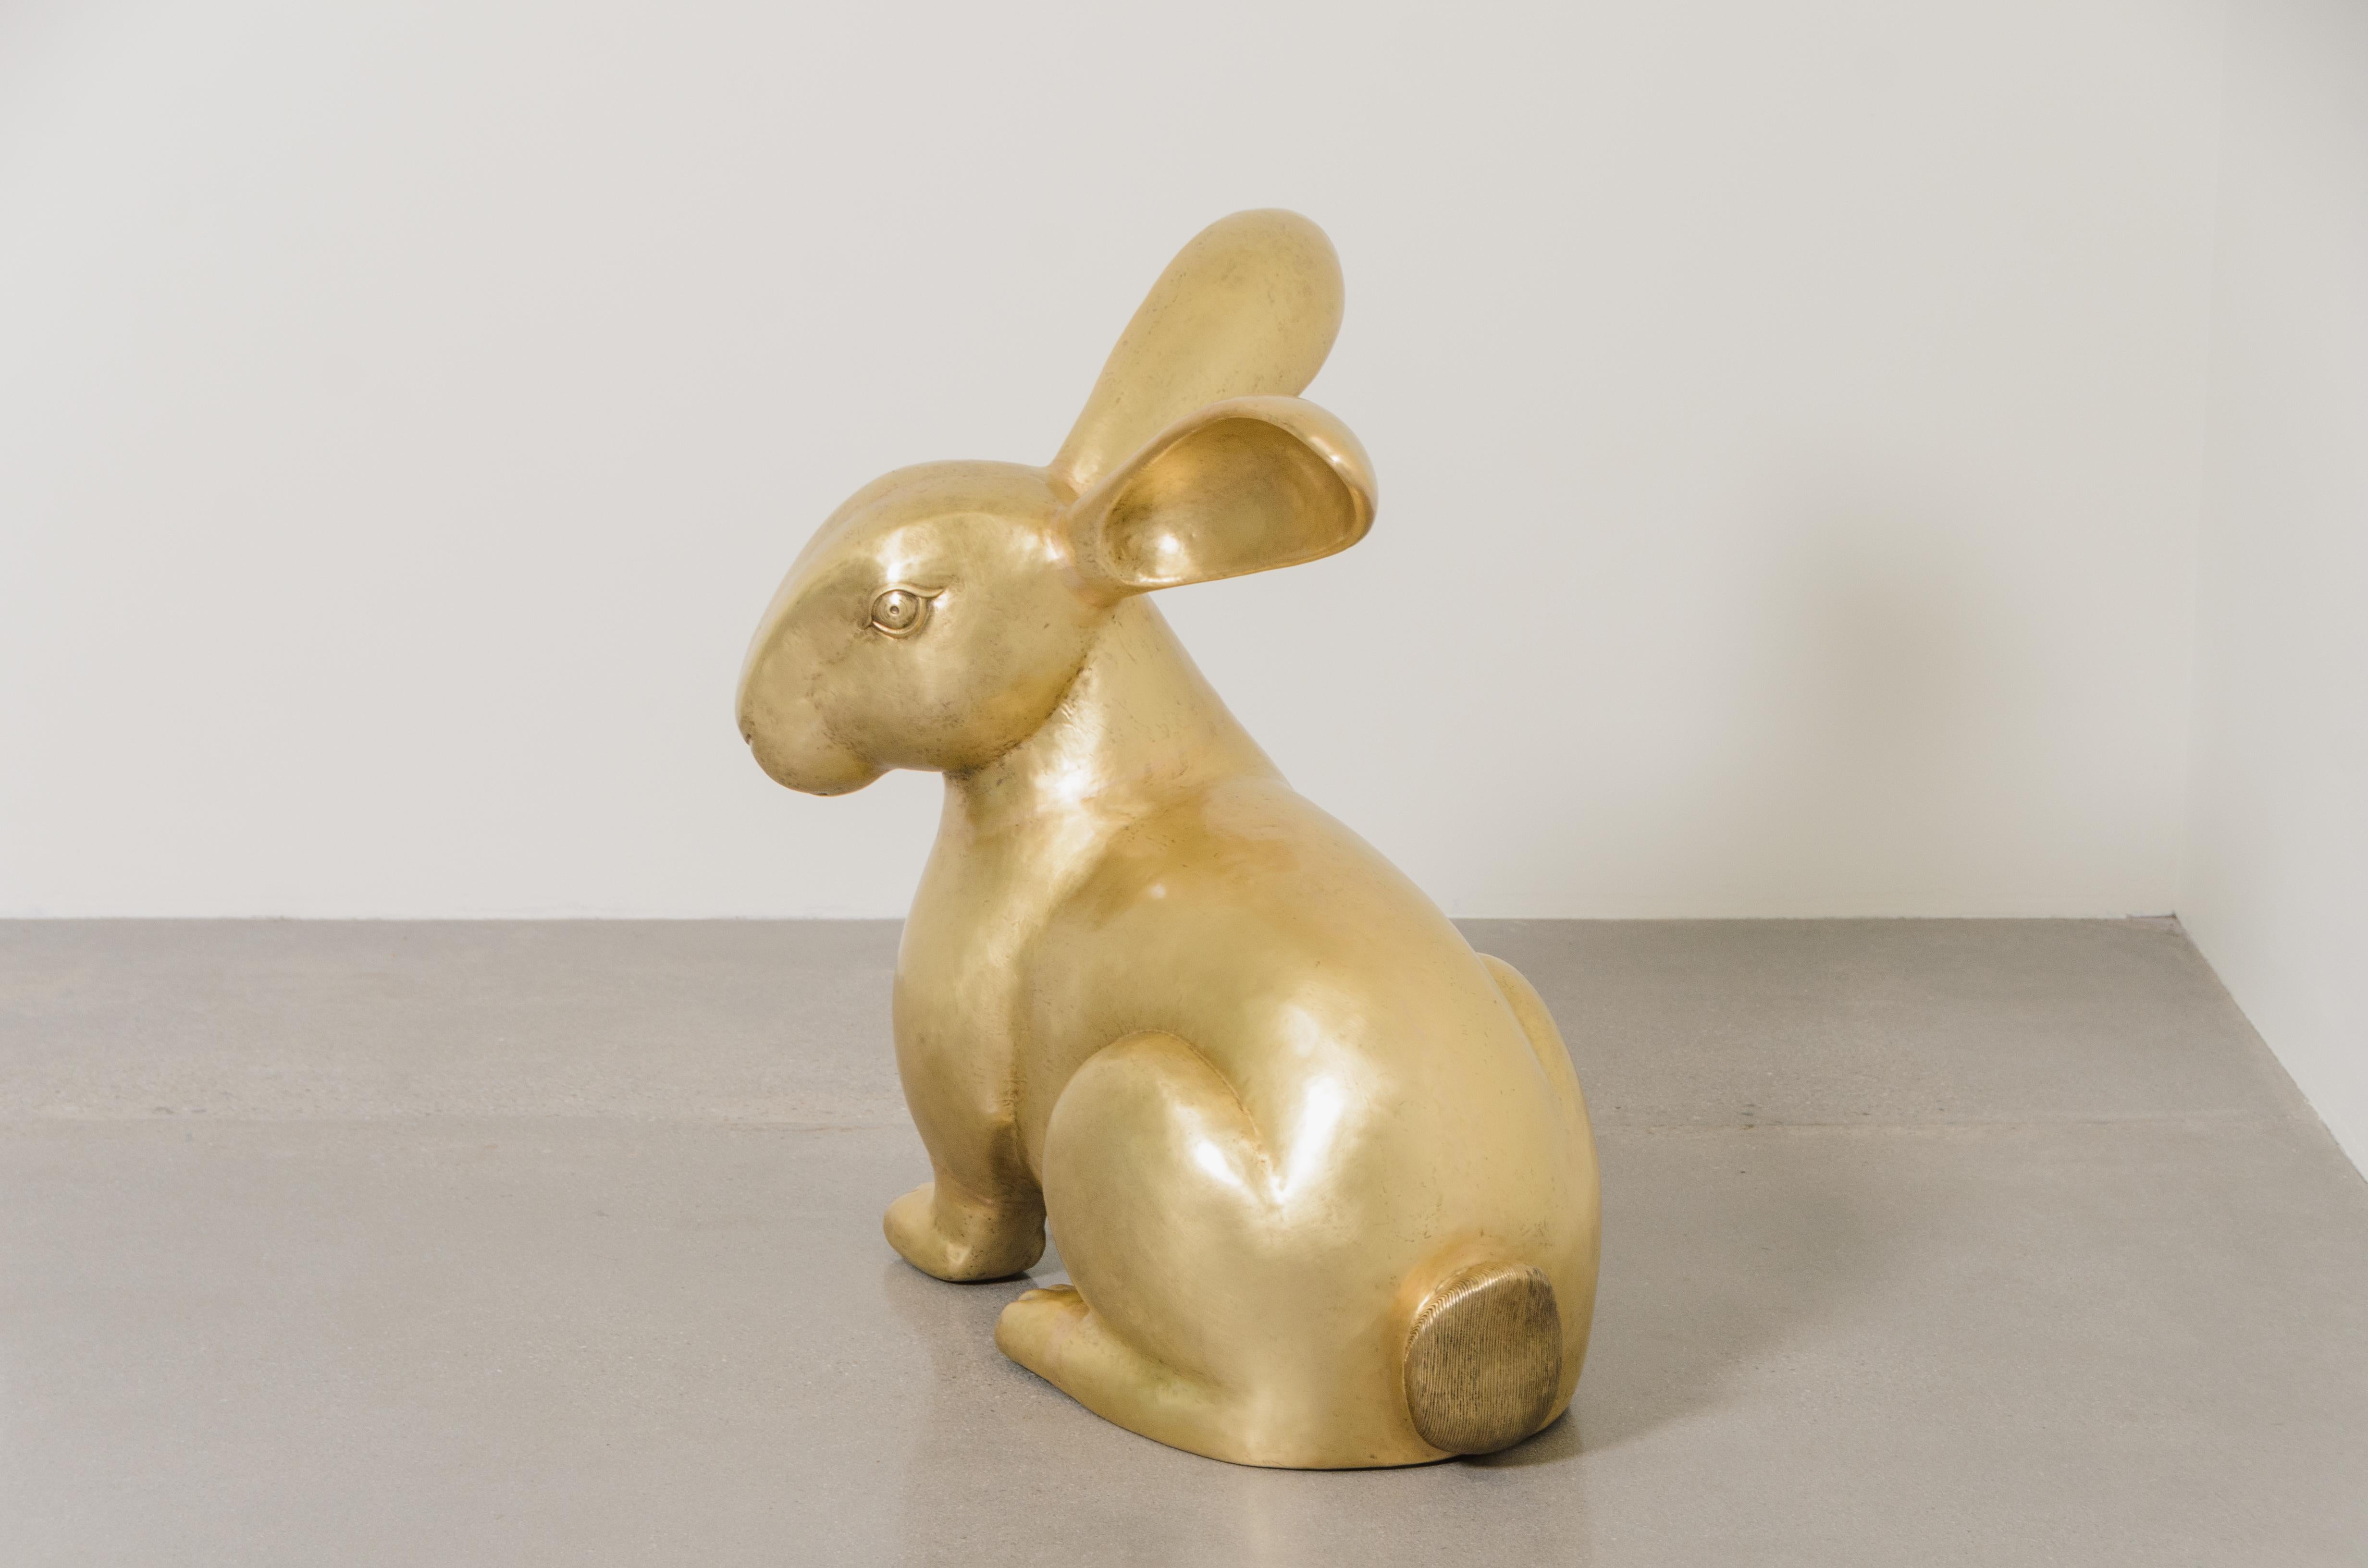 Contemporary Rabbit Sculpture in Brass by Robert Kuo, Hand Repoussé, Limited In New Condition For Sale In Los Angeles, CA